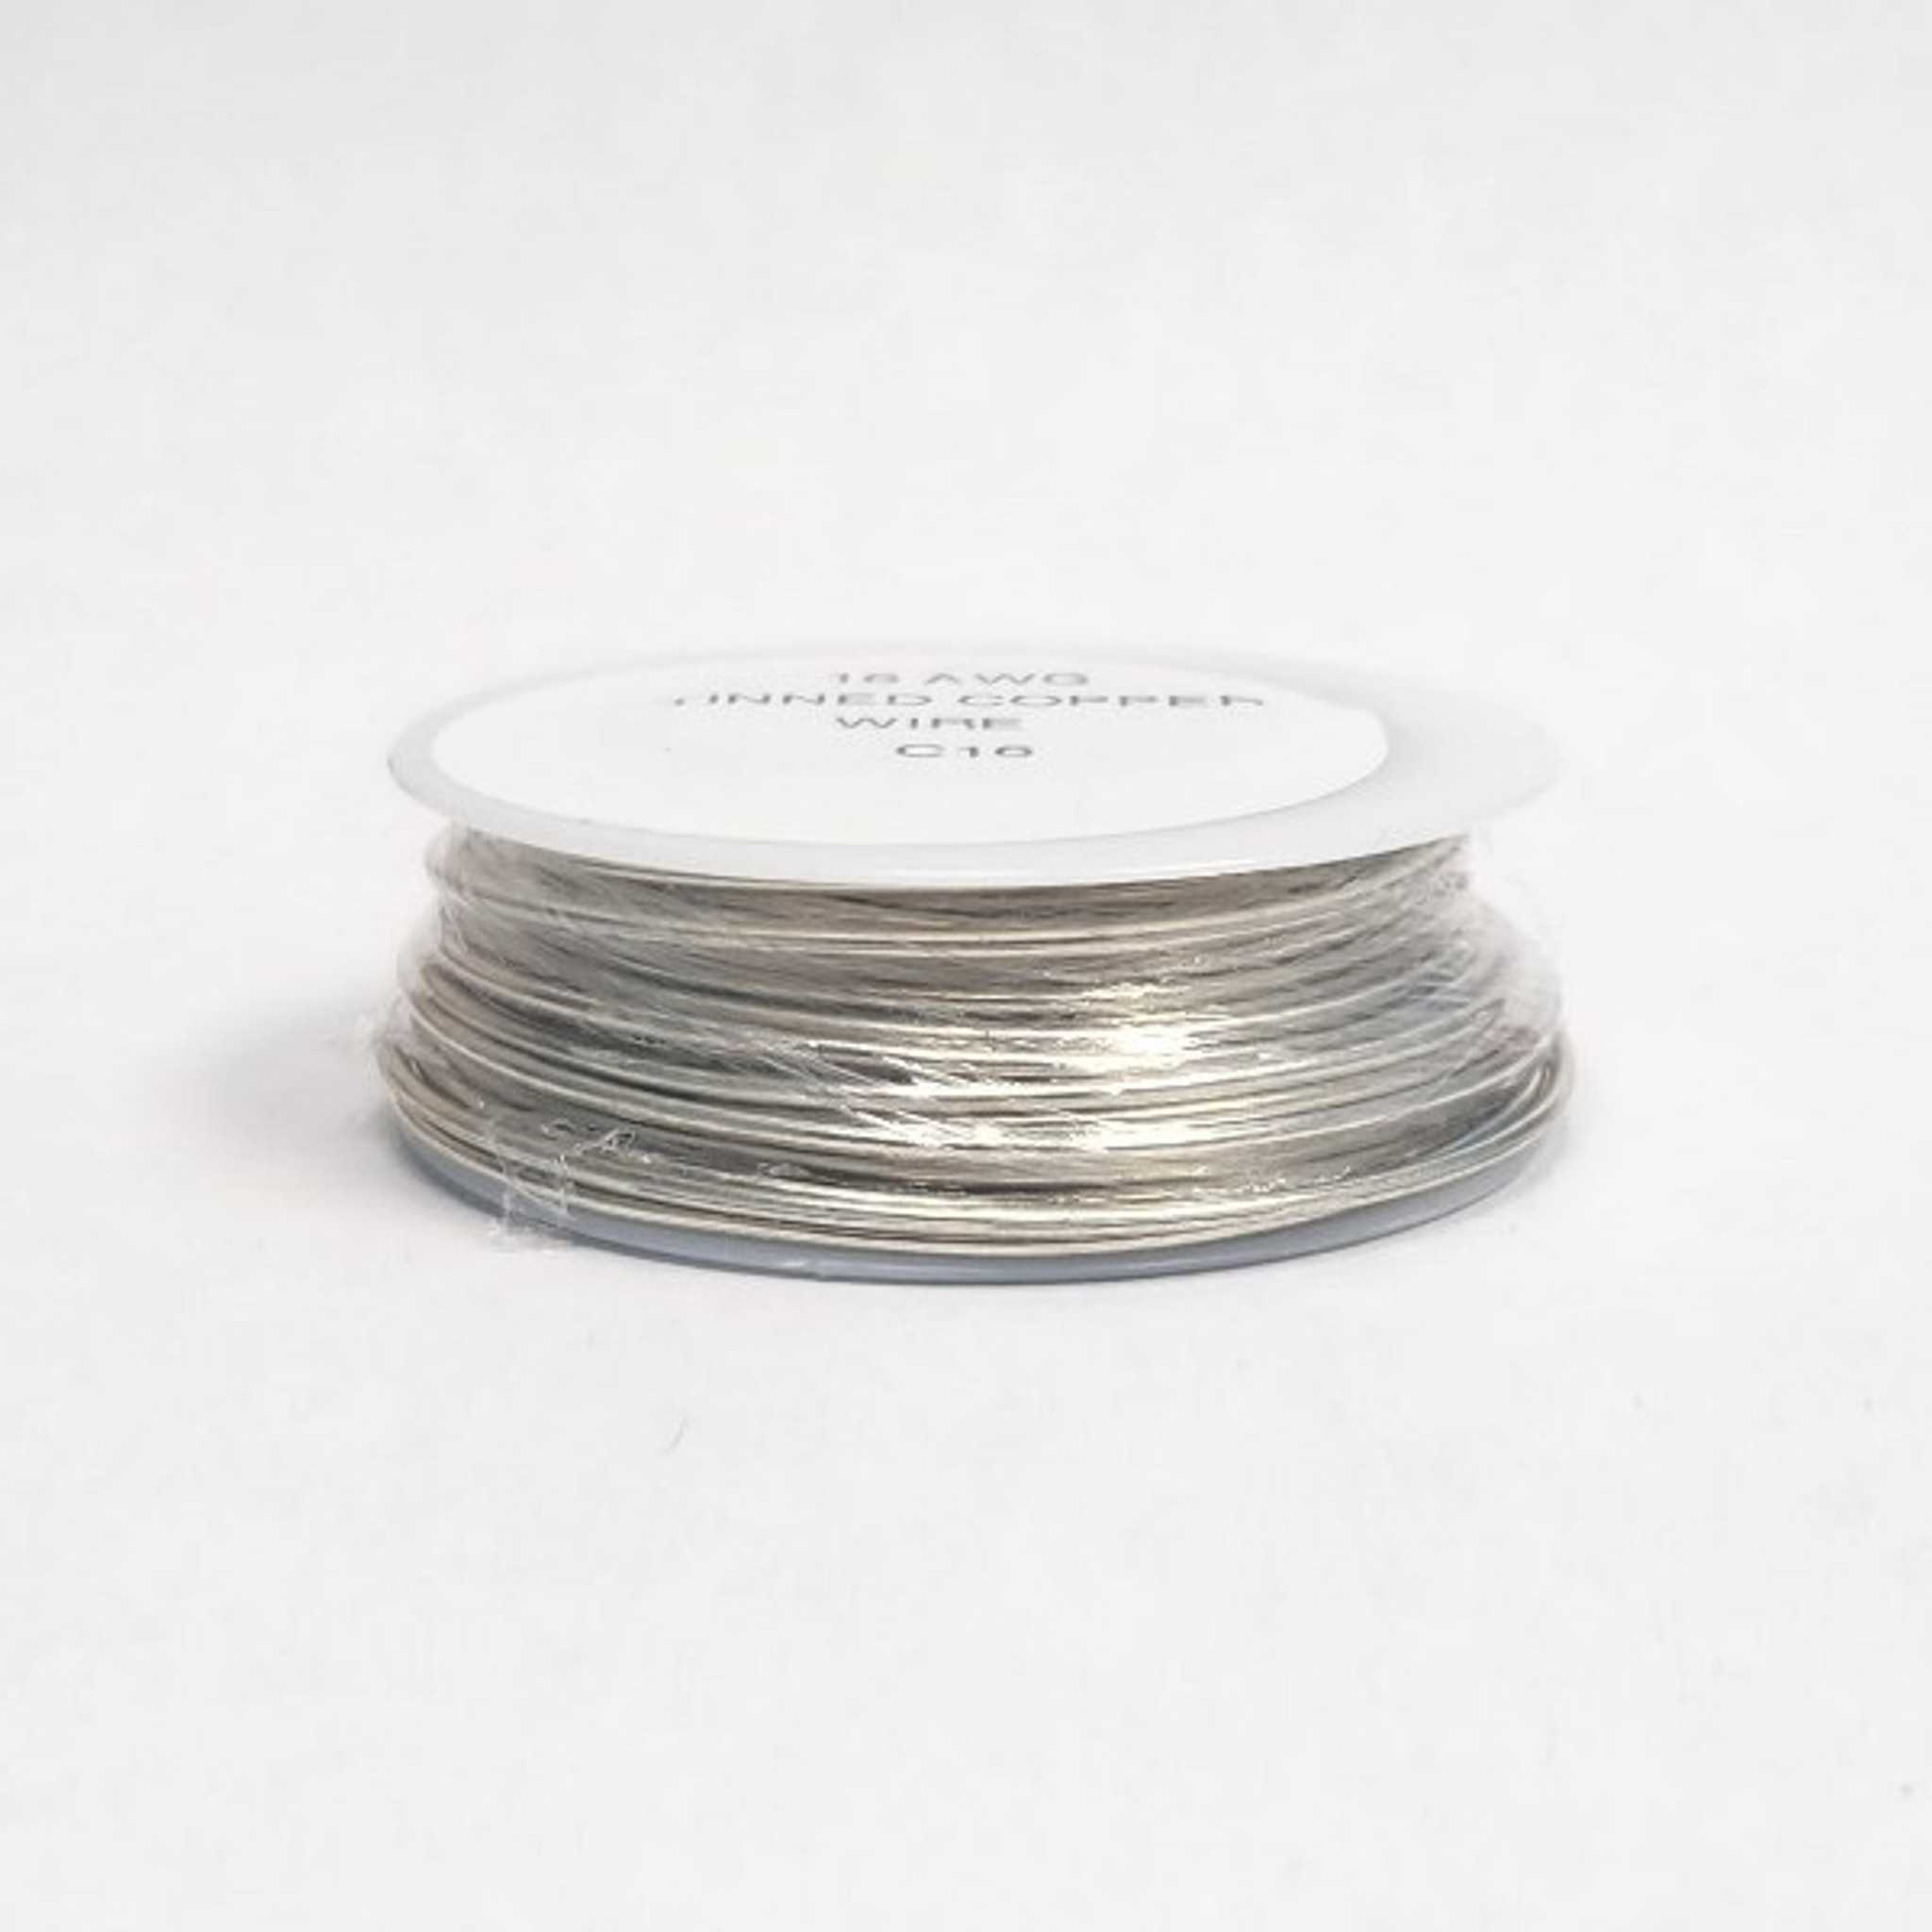 16 Awg Stranded Electrical Wire 16 Gauge Tinned Copper, 44% OFF